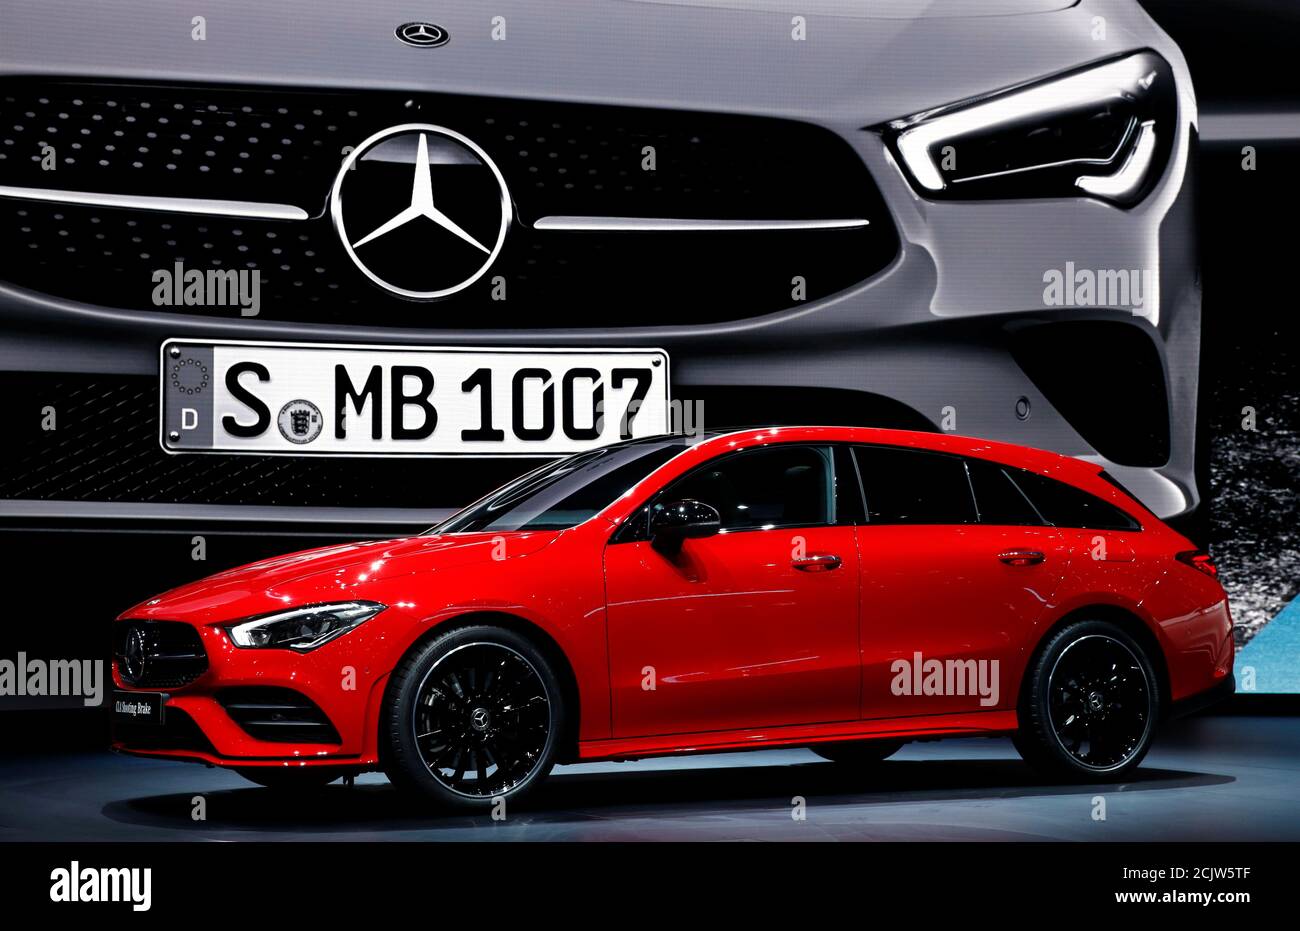 The new Mercedes-Benz CLA Shooting Brake is displayed at the 89th Geneva  International Motor Show in Geneva, Switzerland March 5, 2019.  REUTERS/Denis Balibouse Stock Photo - Alamy